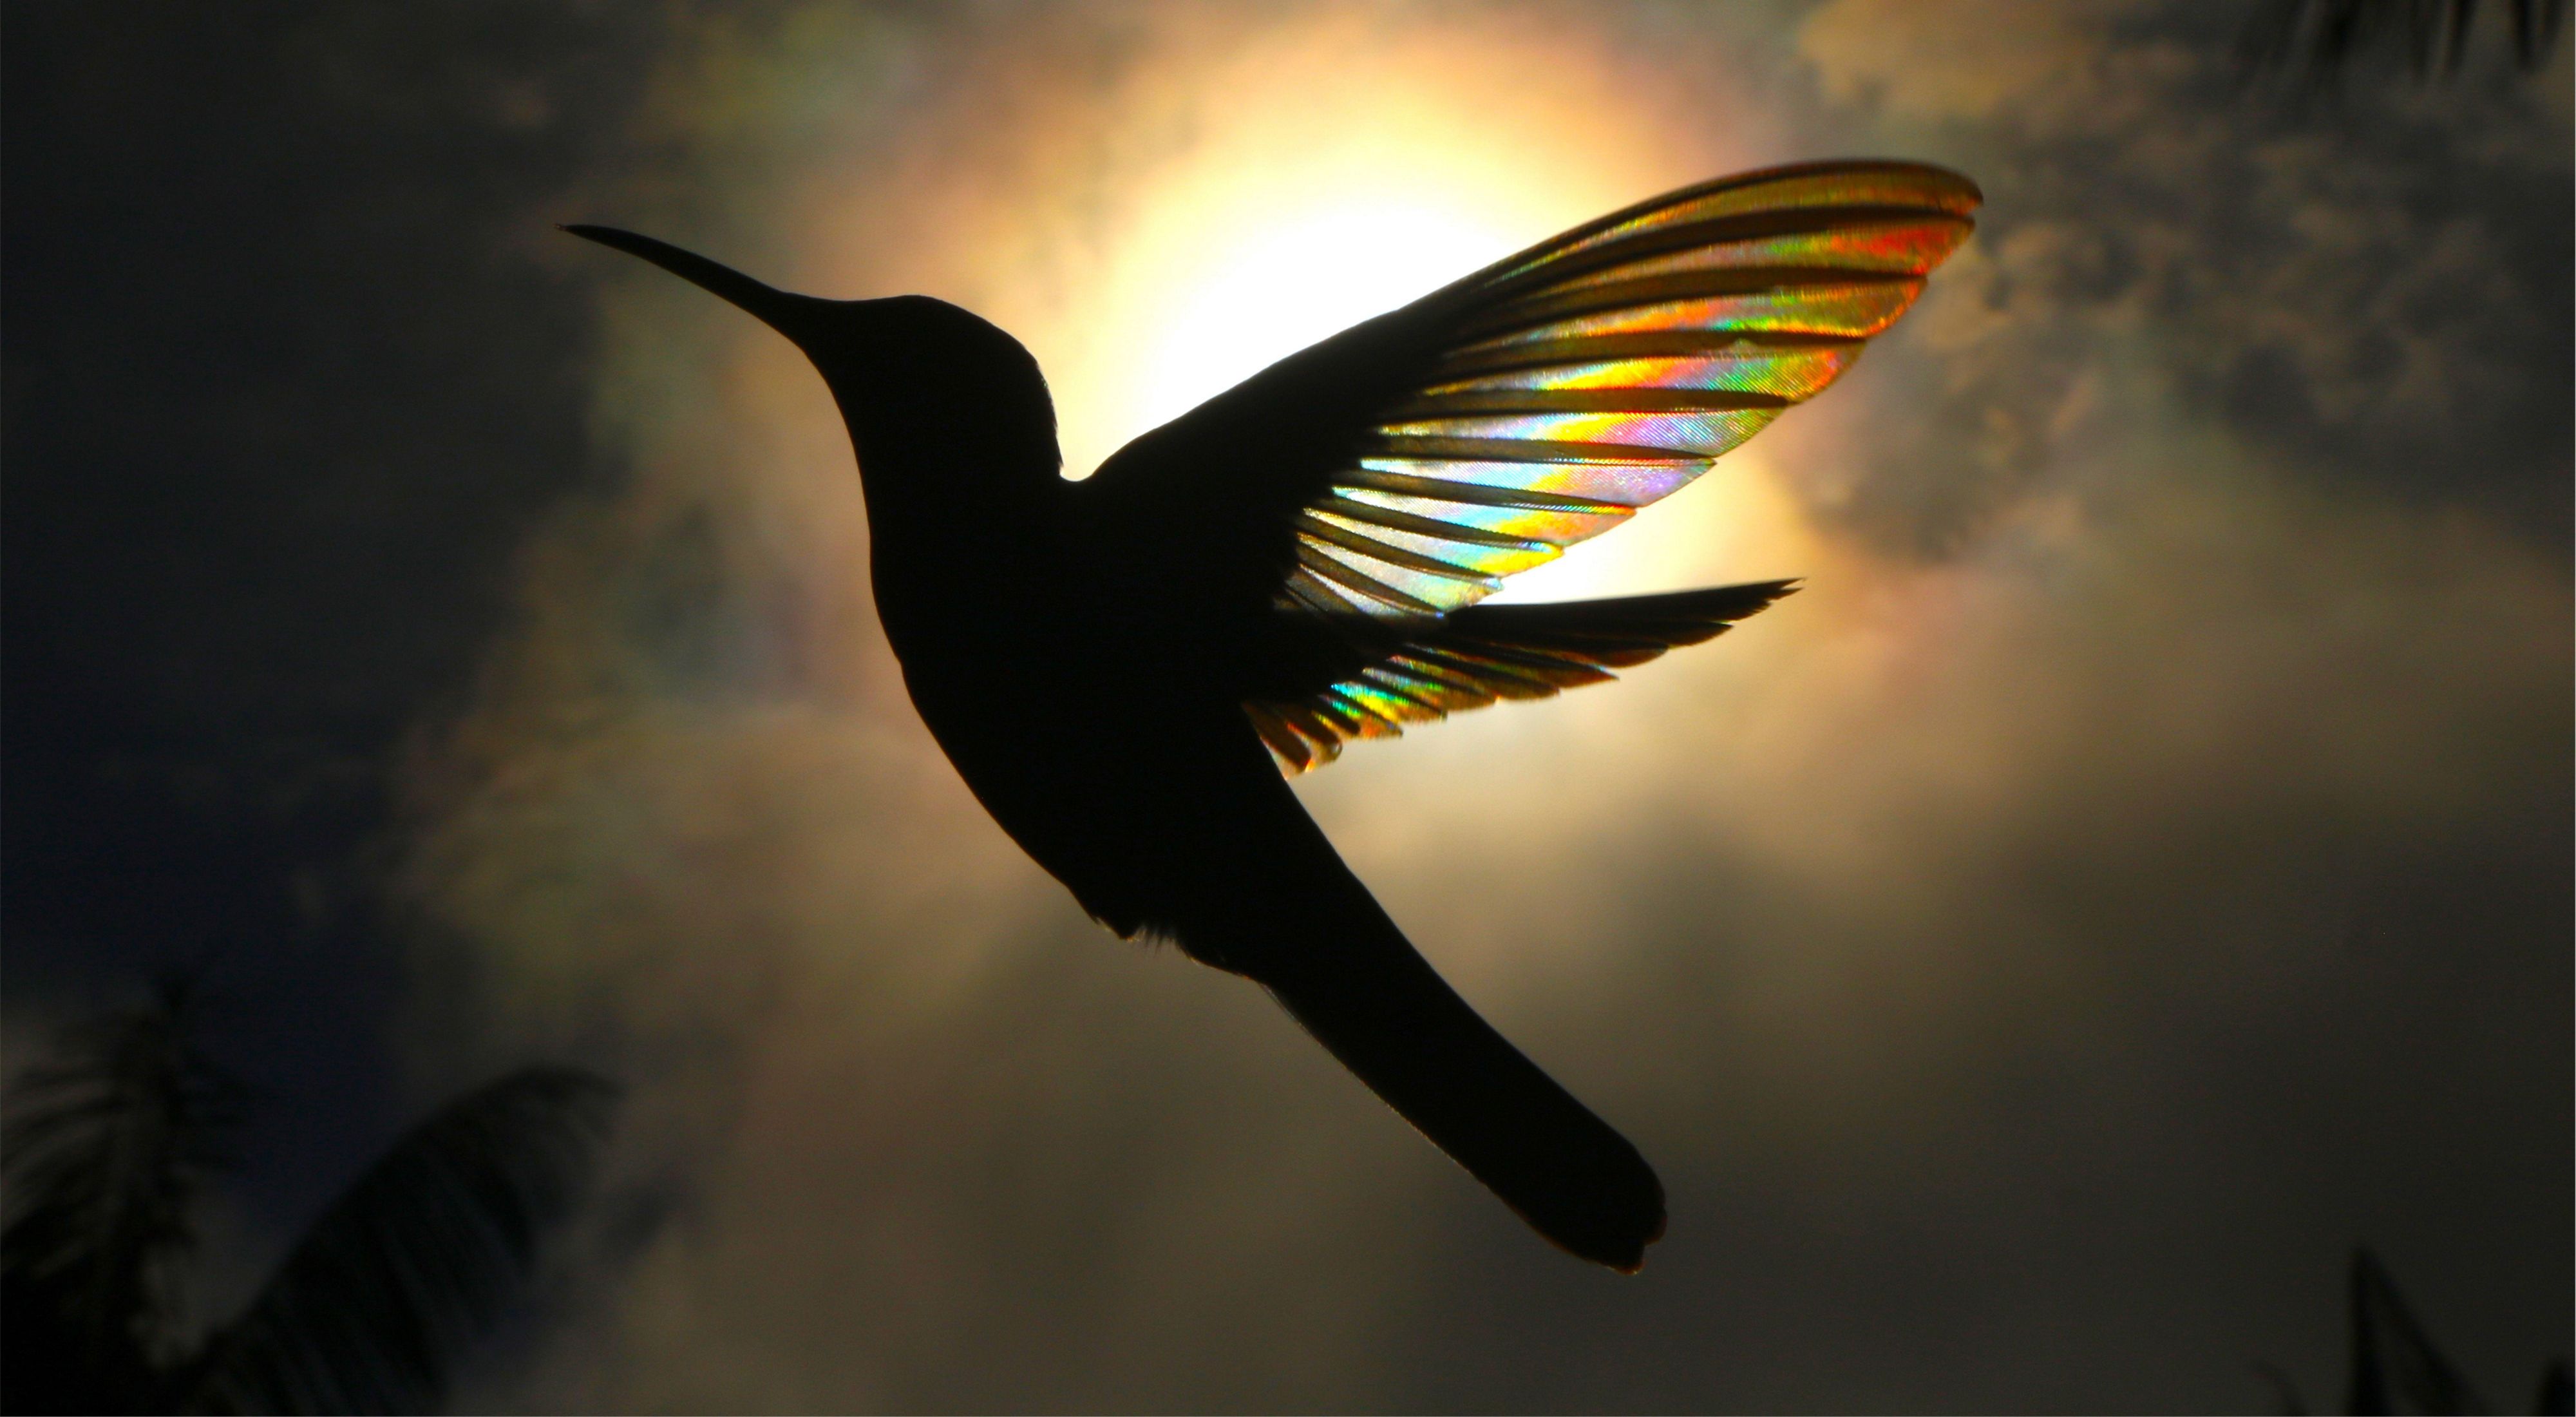 The silhouette of a hummingbird flying, with sun shining through its wings creating a rainbow effect.